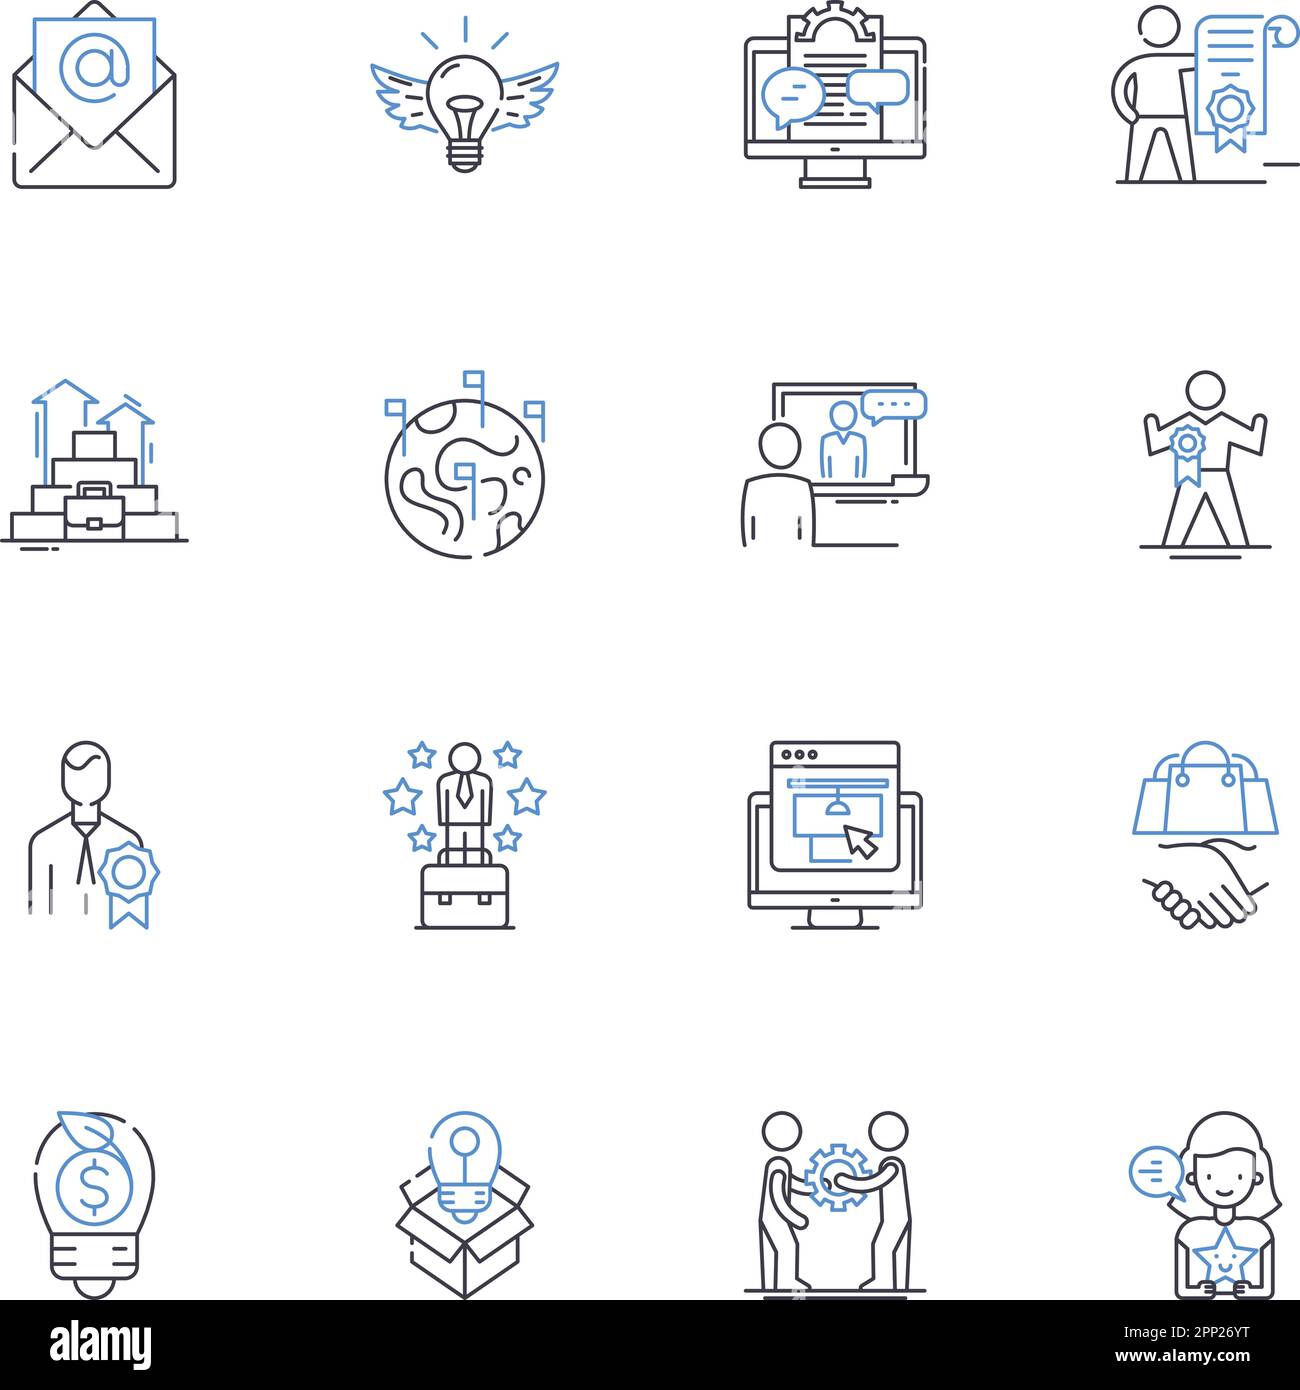 Segmentation concept line icons collection. Market, Demographics, Psychographics, Behavior, Segments, Niche, Targeting vector and linear illustration Stock Vector